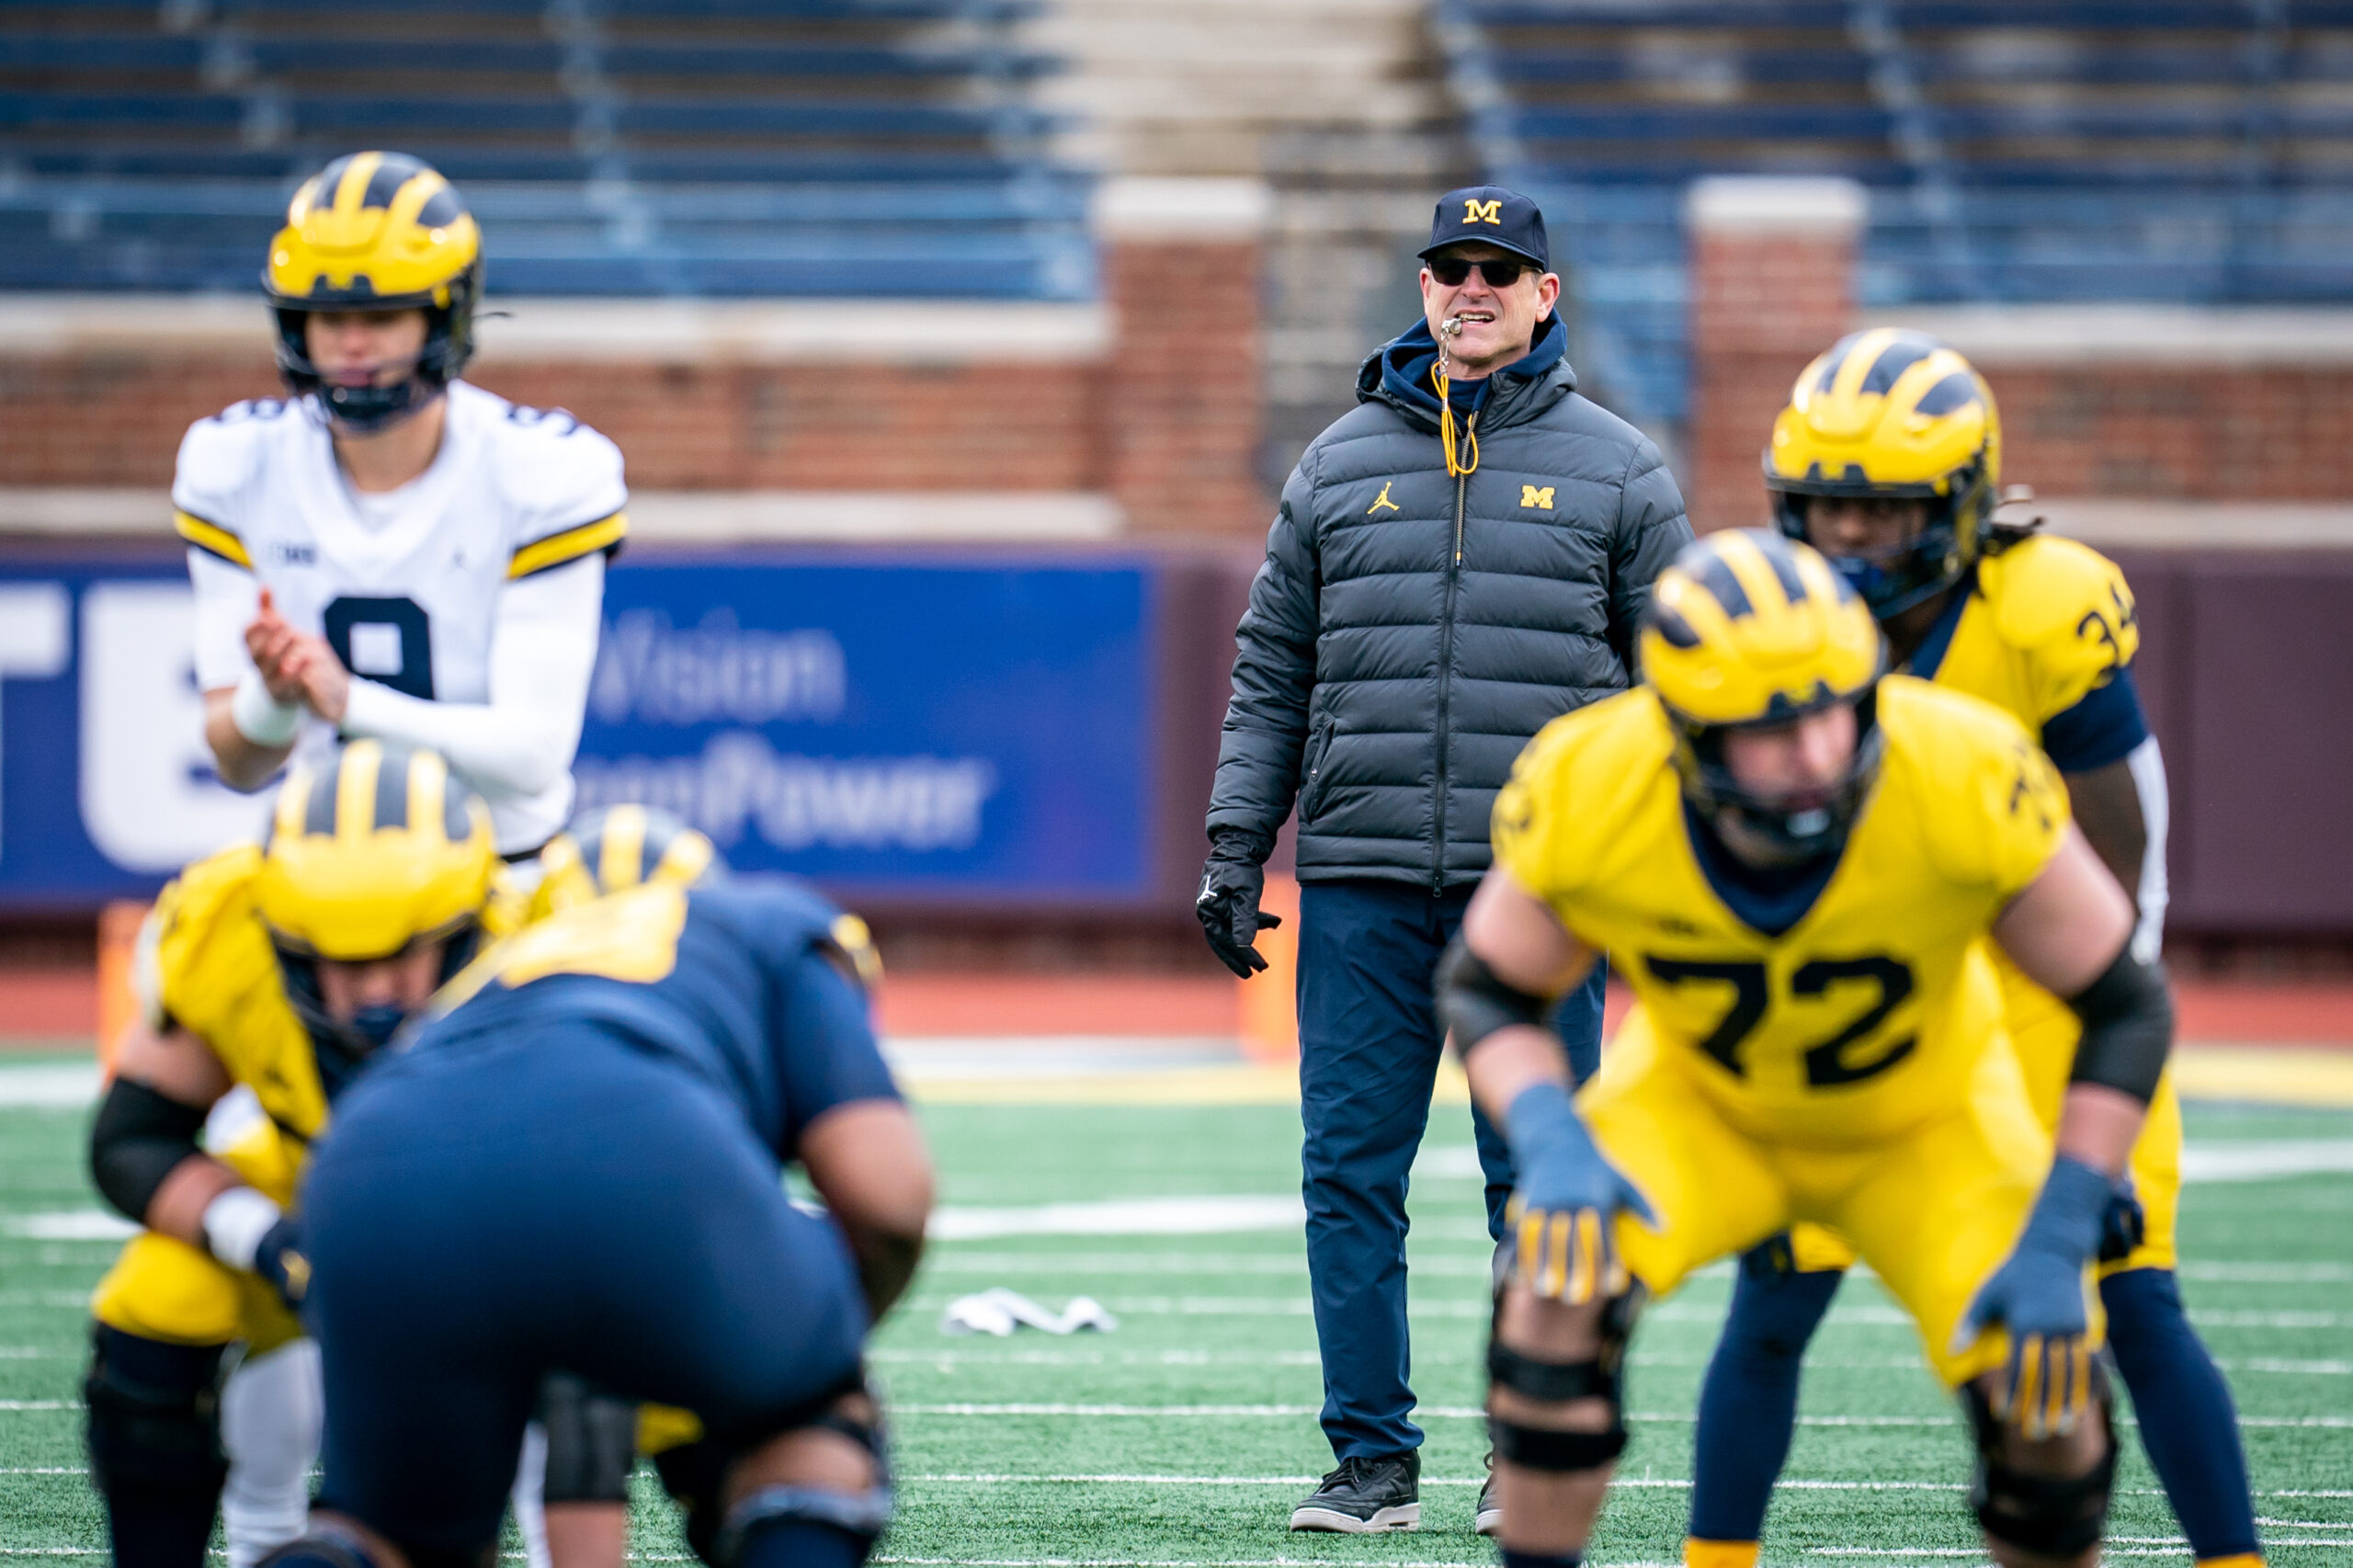 ANN ARBOR, MI - APRIL 01:  Head Coach Jim Harbaugh looks on during a play in the second quarter of the Michigan spring football game at Michigan Stadium on April 1, 2023 in Ann Arbor, Michigan. (Photo by Jaime Crawford/Getty Images)